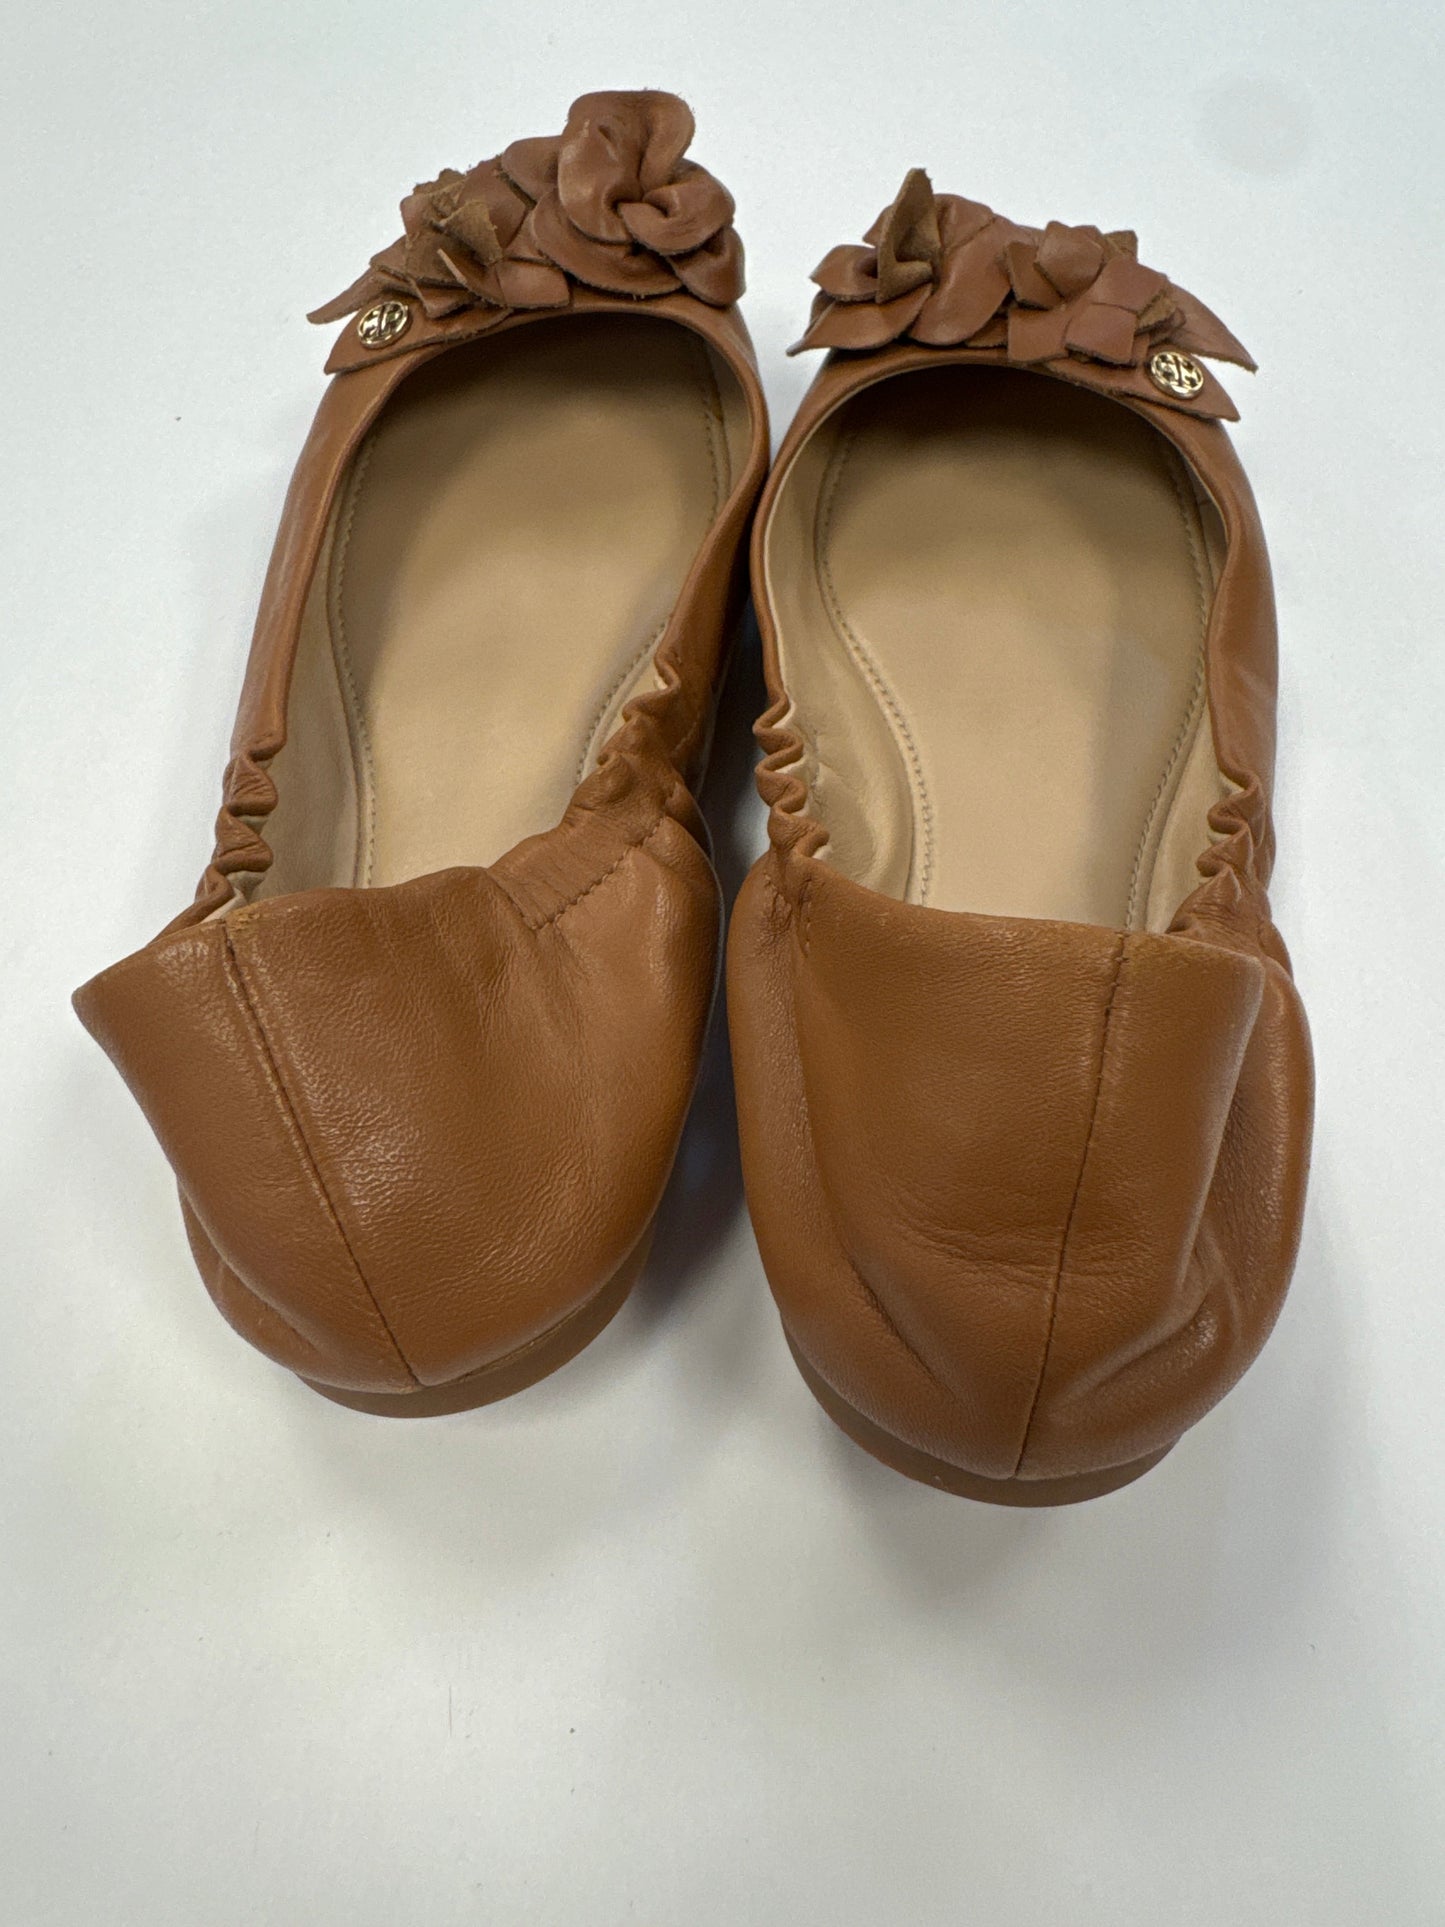 Brown Shoes Flats Tory Burch, Size 7.5